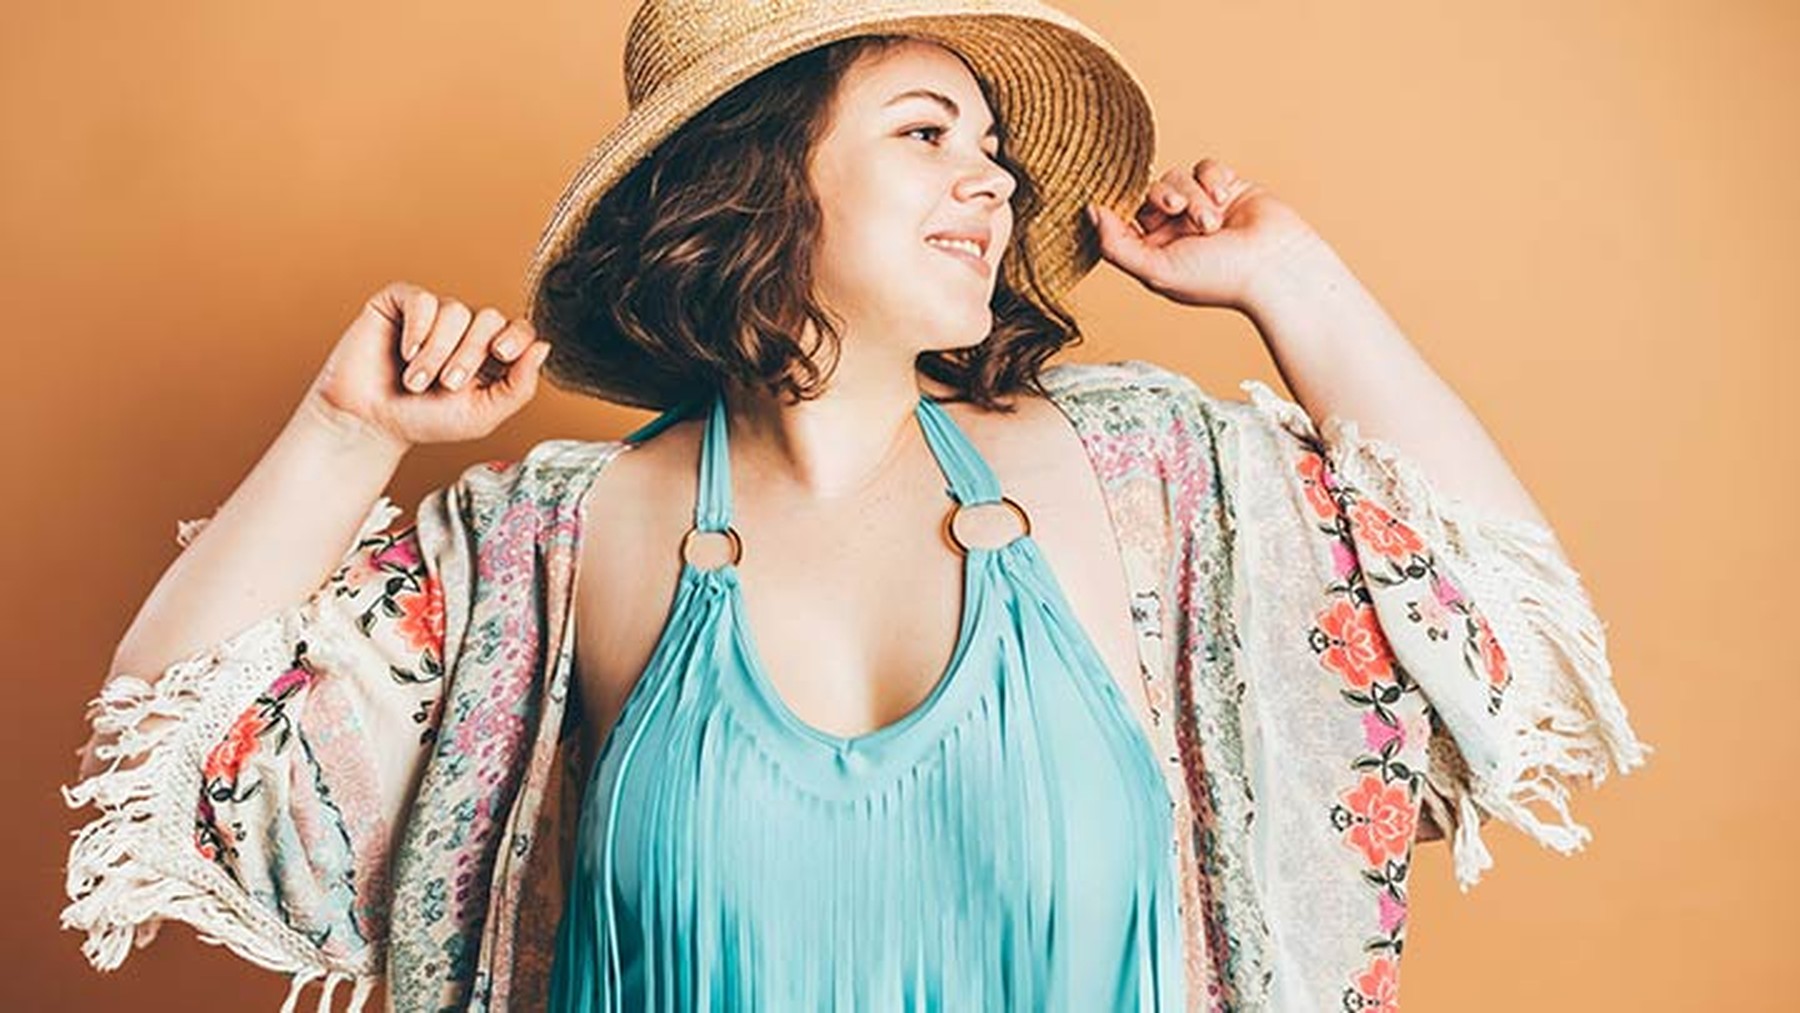 Plus size white woman in hat and spring outfit